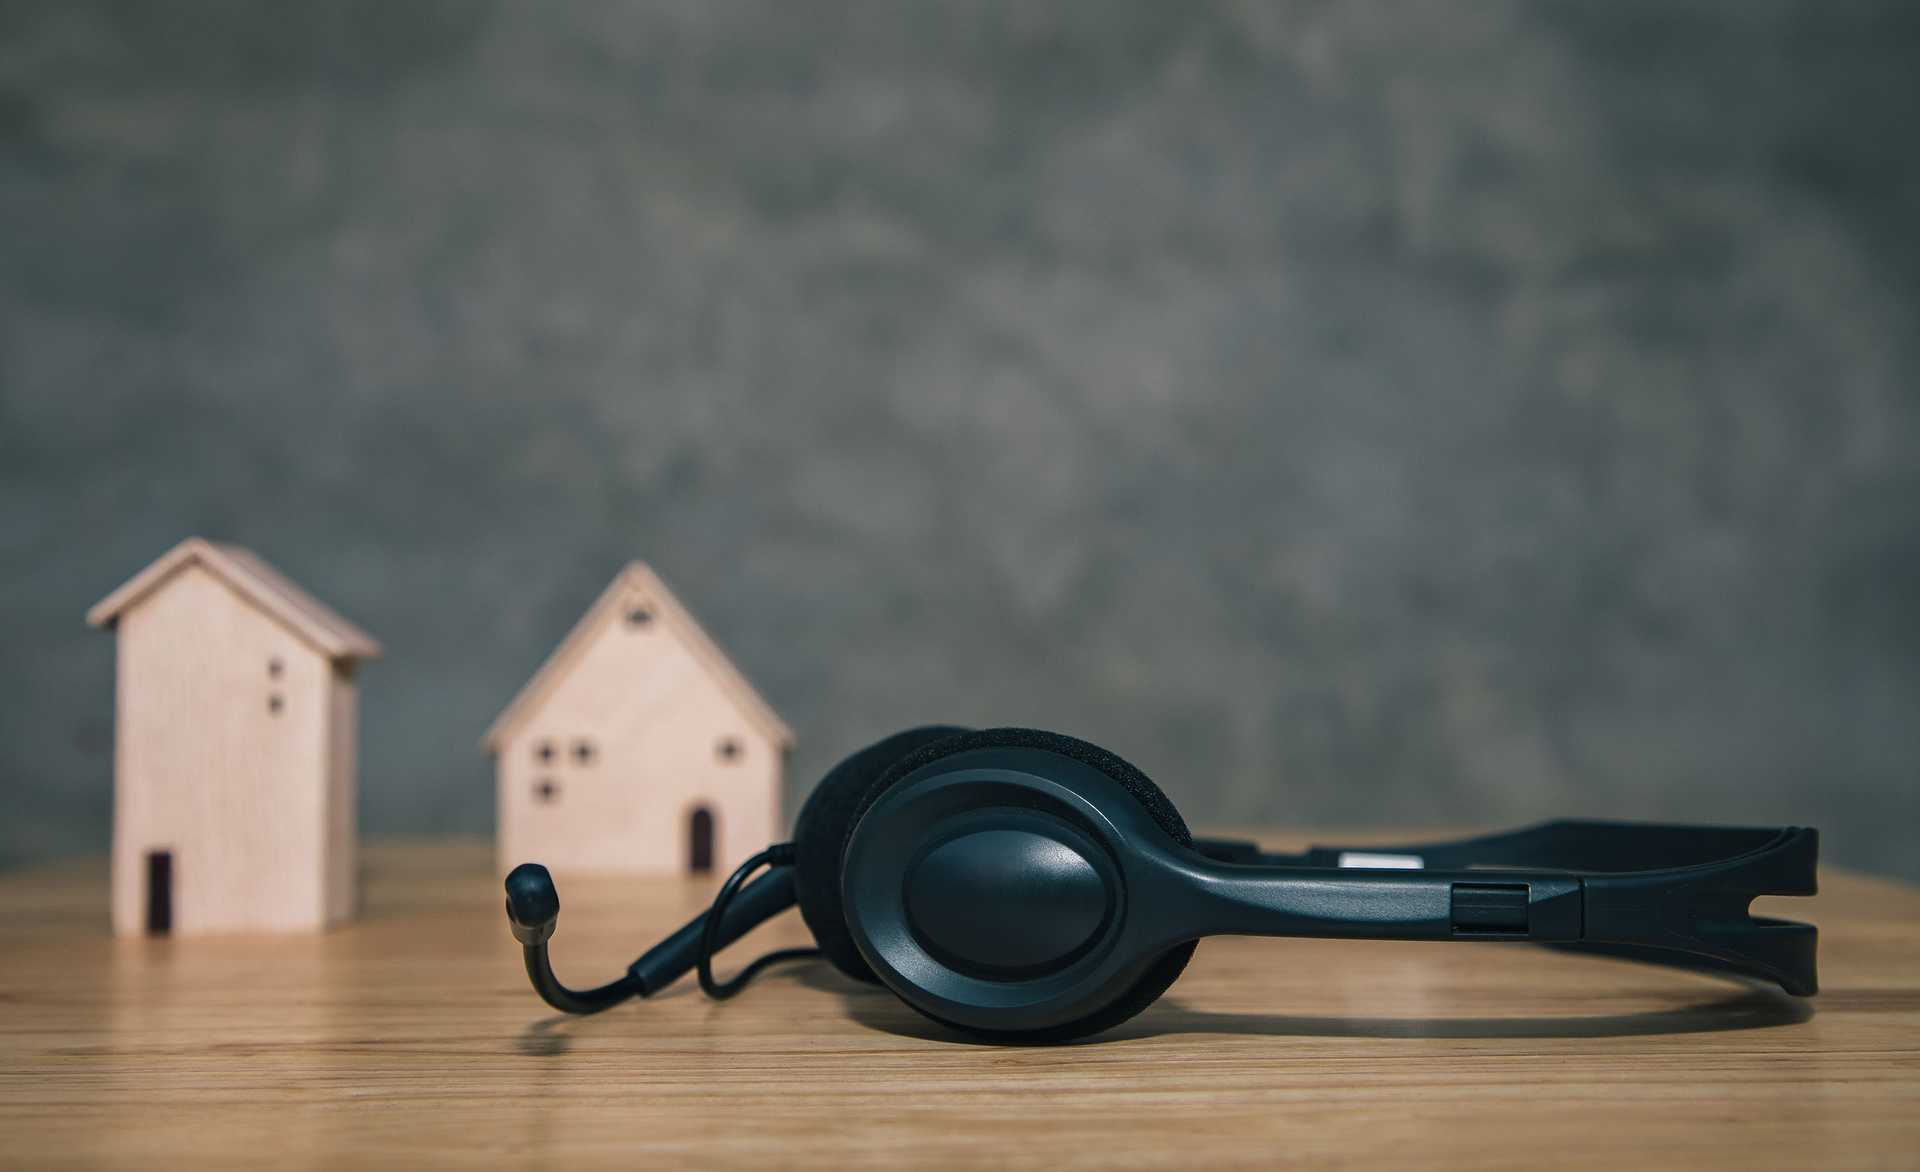 A black headset on a table infront of miniature wooden houses.